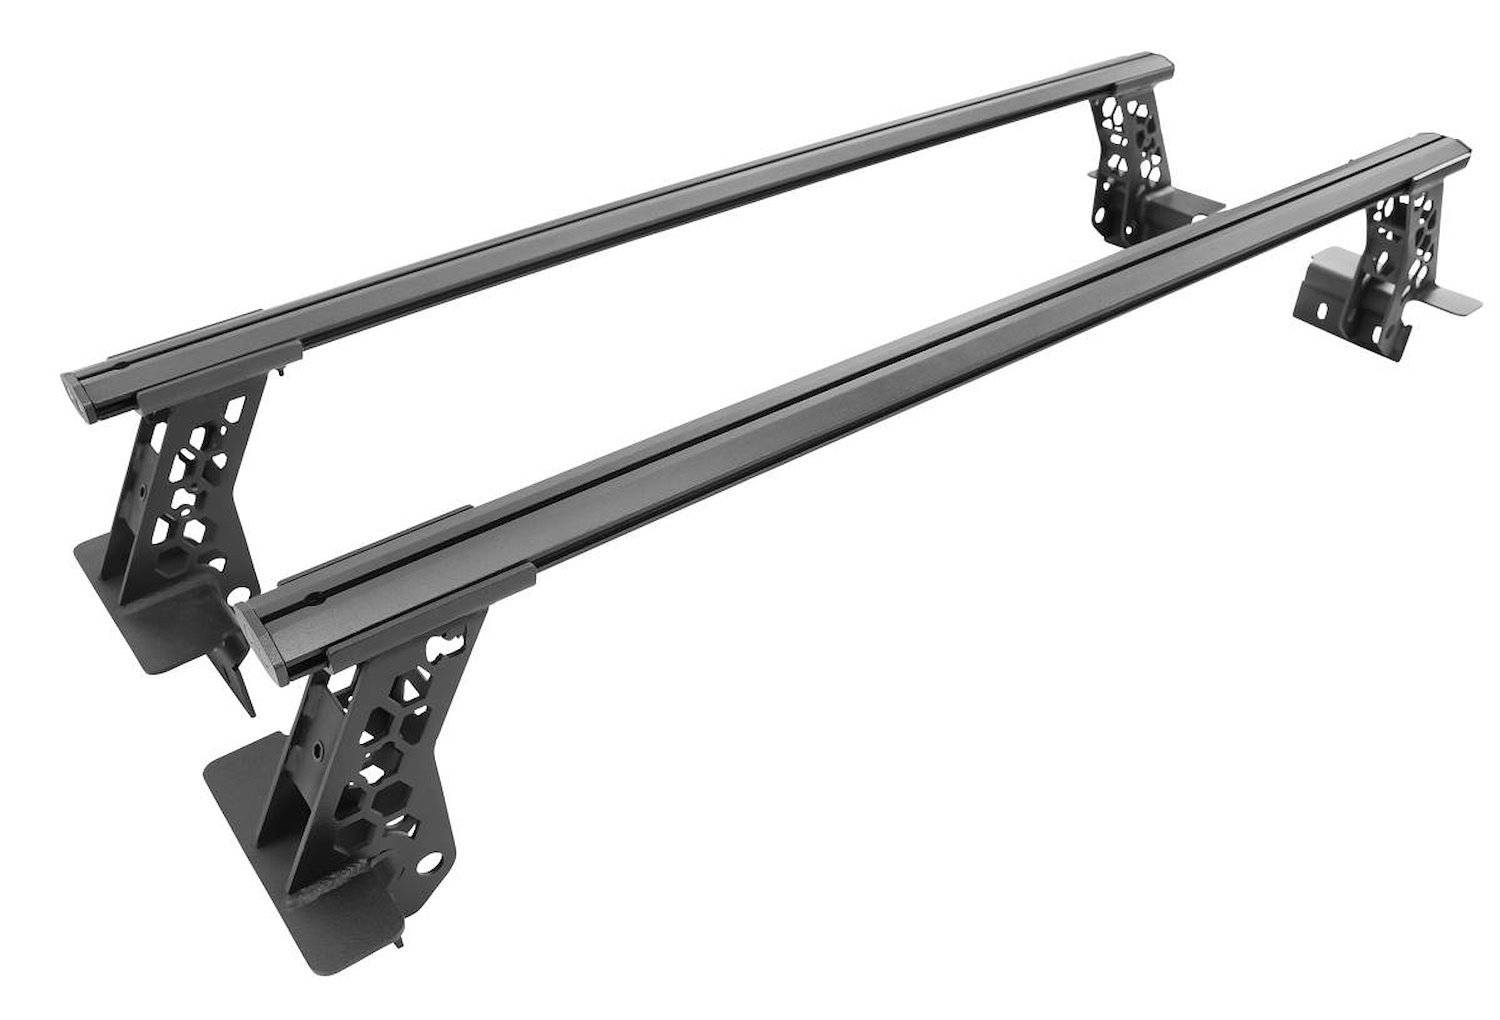 XRS Cross Bars Bed Rail Kit for Select Late-Model Chevy, Ford, GMC, Ram, Toyota Full-Sized Crew/Ext. Cab Pickup Trucks